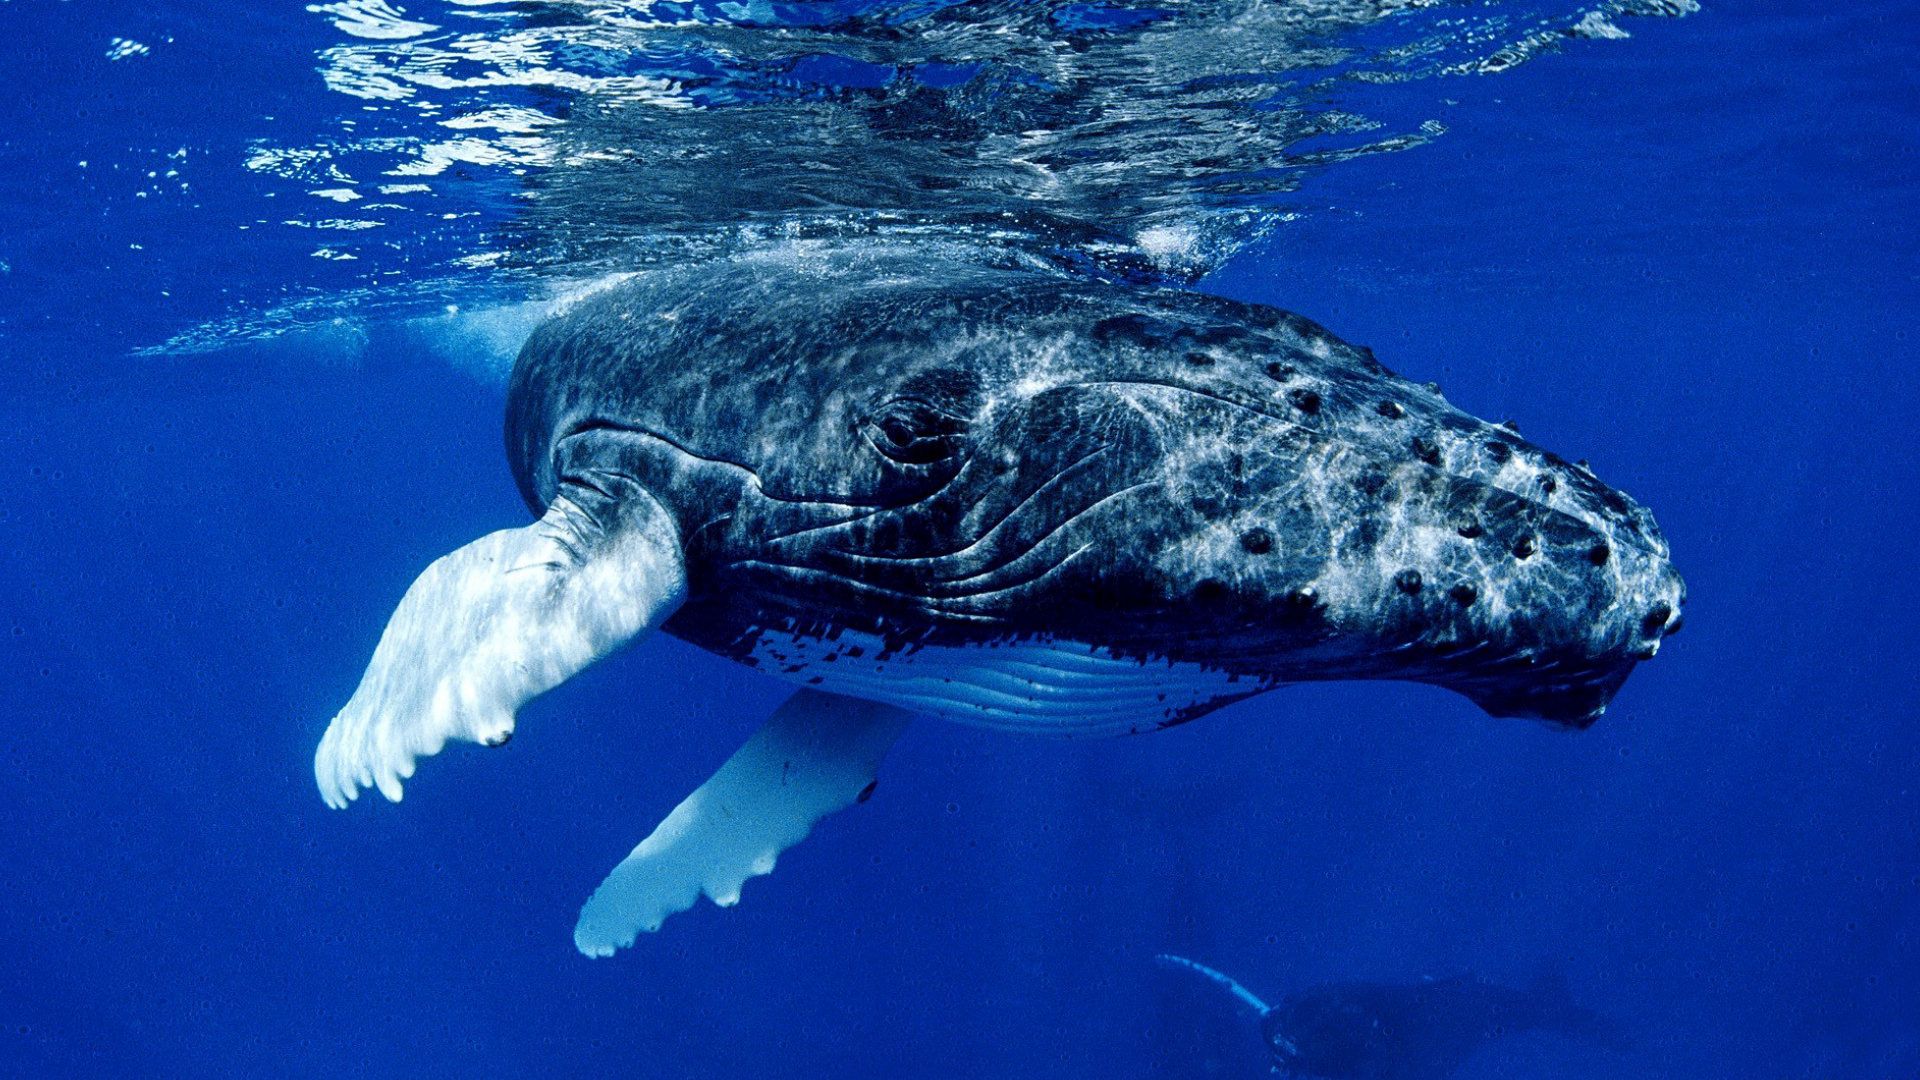 animals, water, ocean, surface, whale, fins